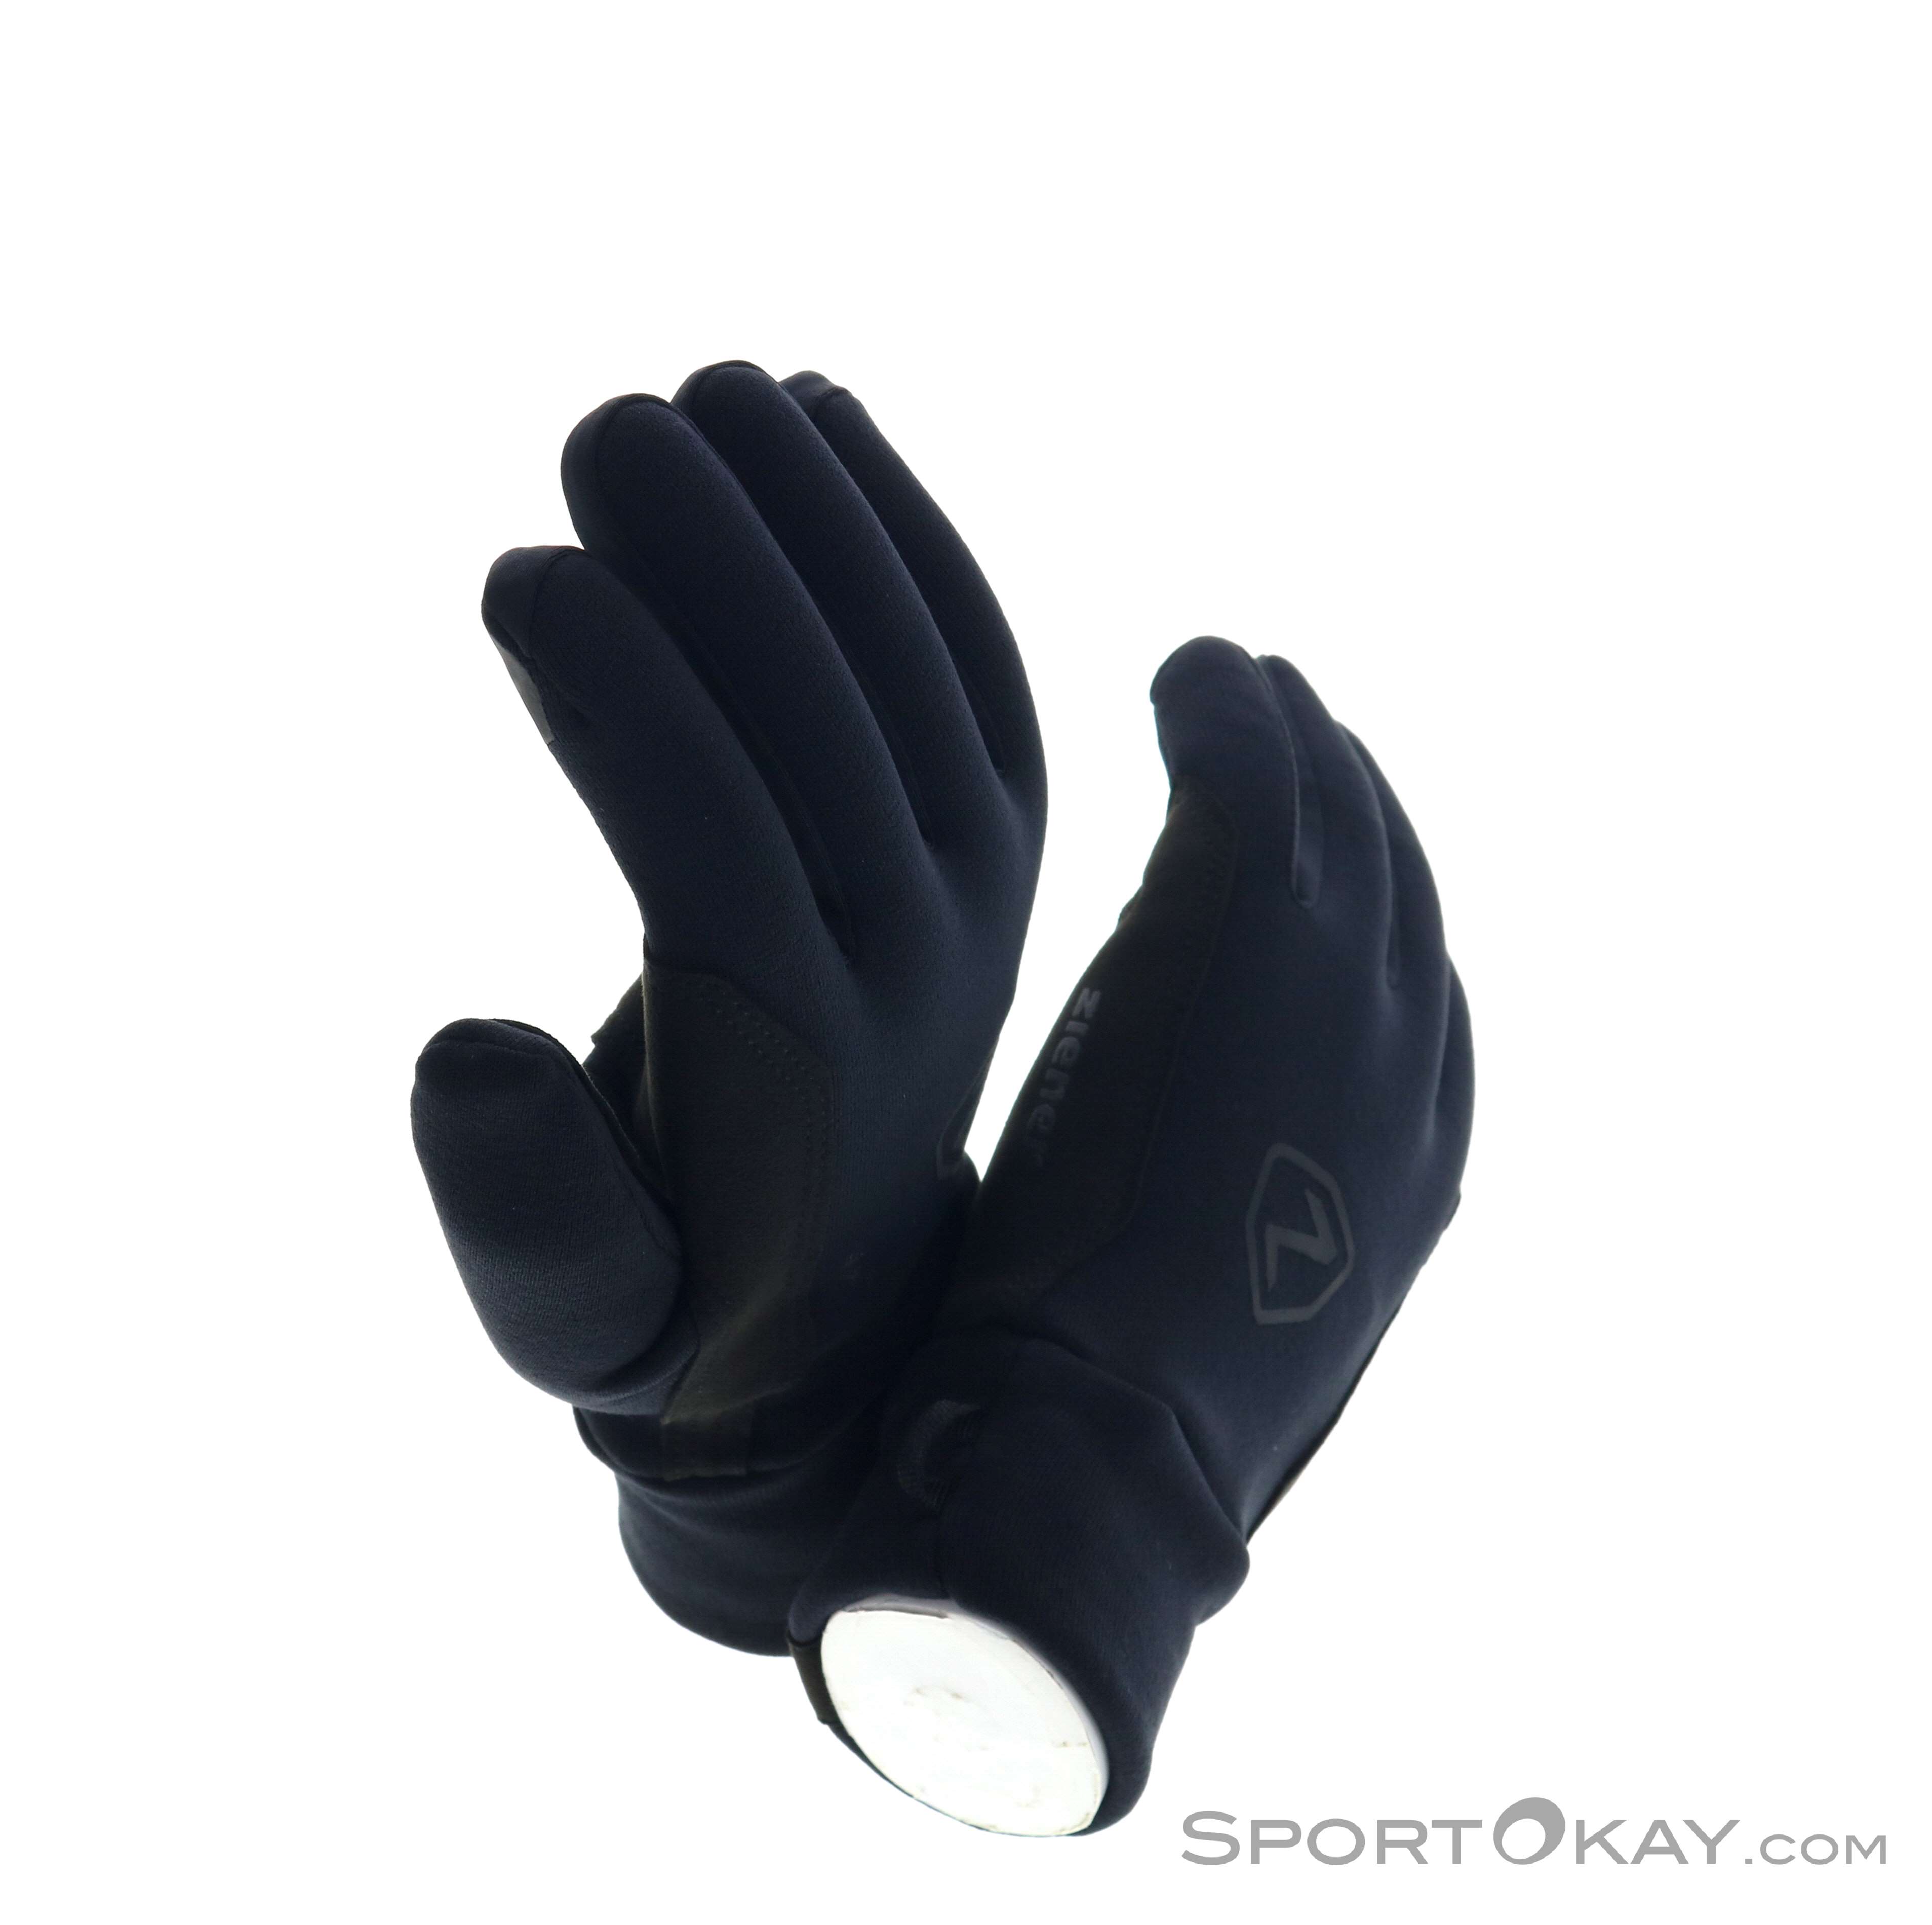 Outdoor Touch Outdoor - Gloves Ziener All - - Gusty Gloves - Clothing